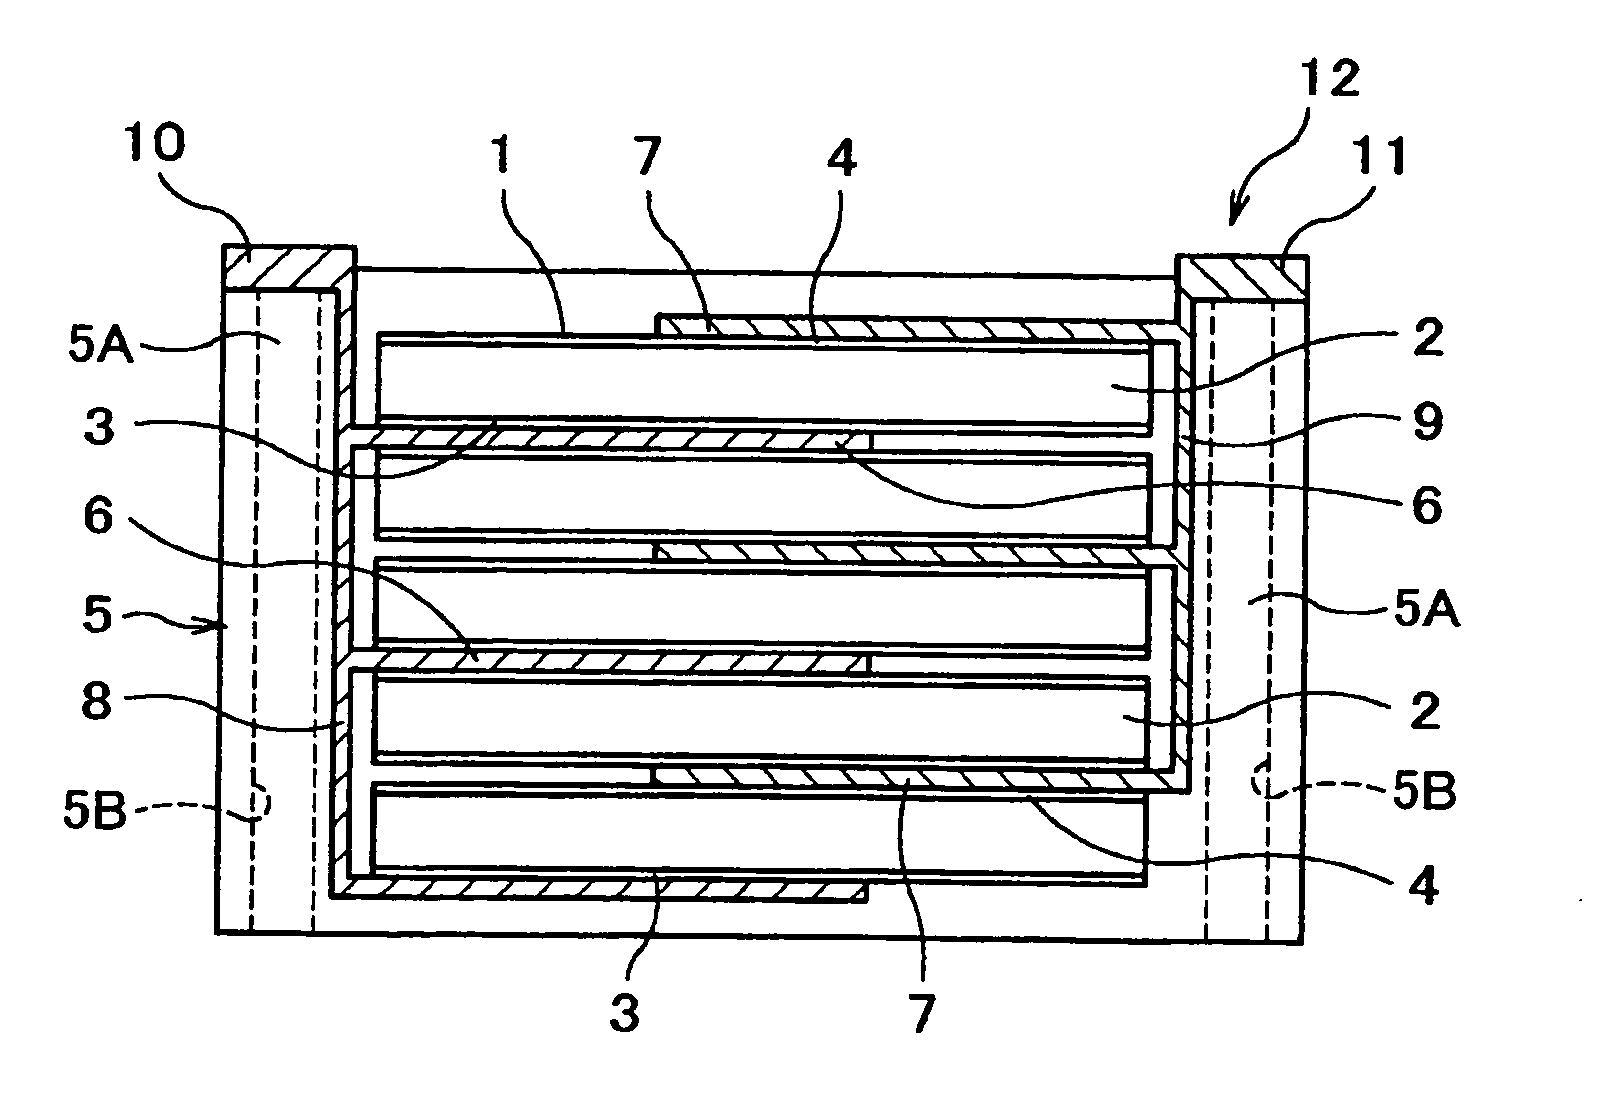 Semiconductor radiation detector and radiological imaging apparatus